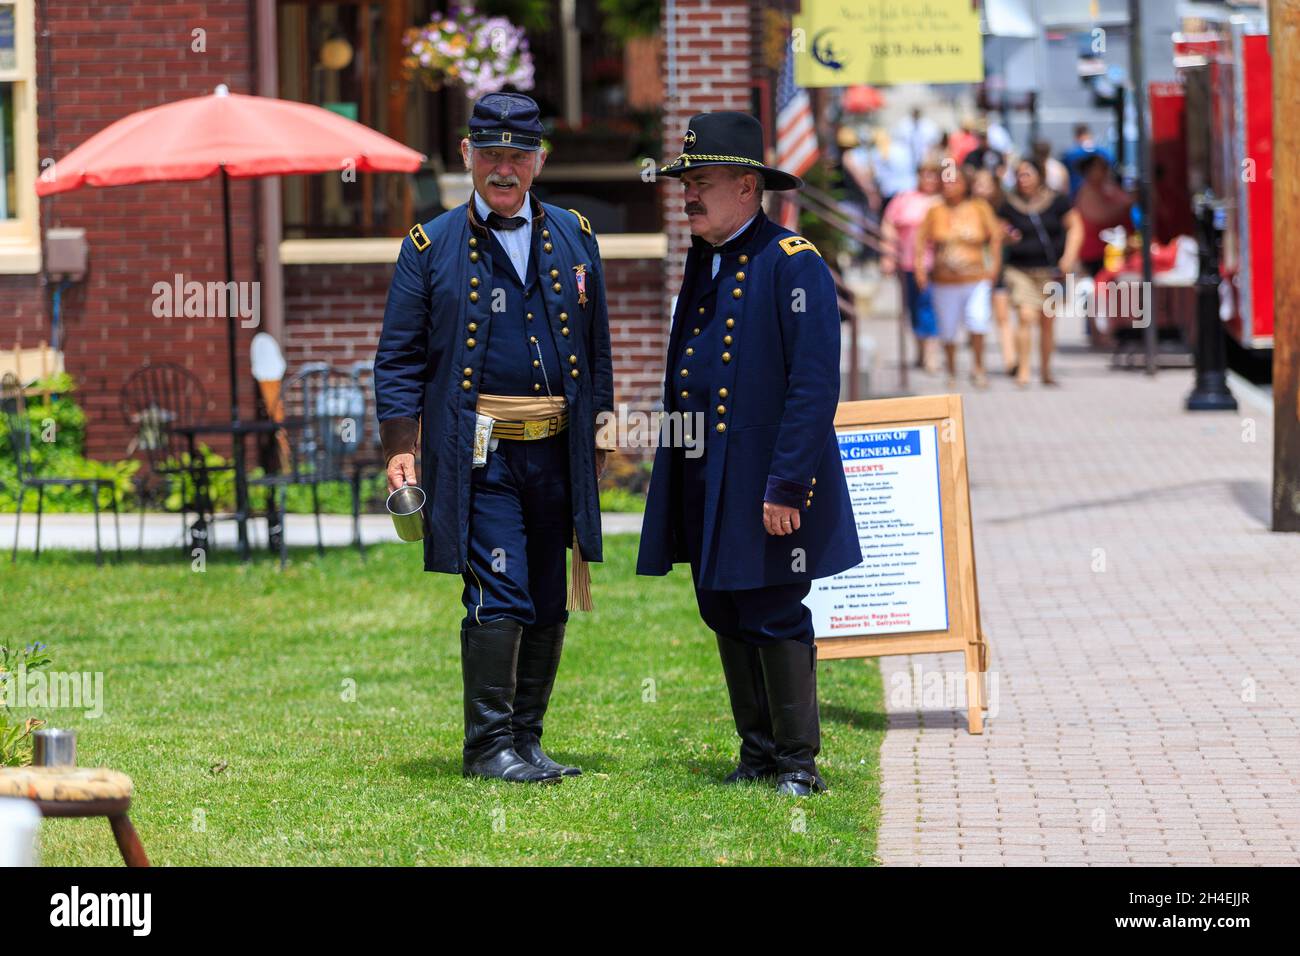 Gettysburg, PA, USA - July 2, 2016: A woman wearing a typical civil war period dress appears in downtown Gettysburg during the annual Battle commemora Stock Photo